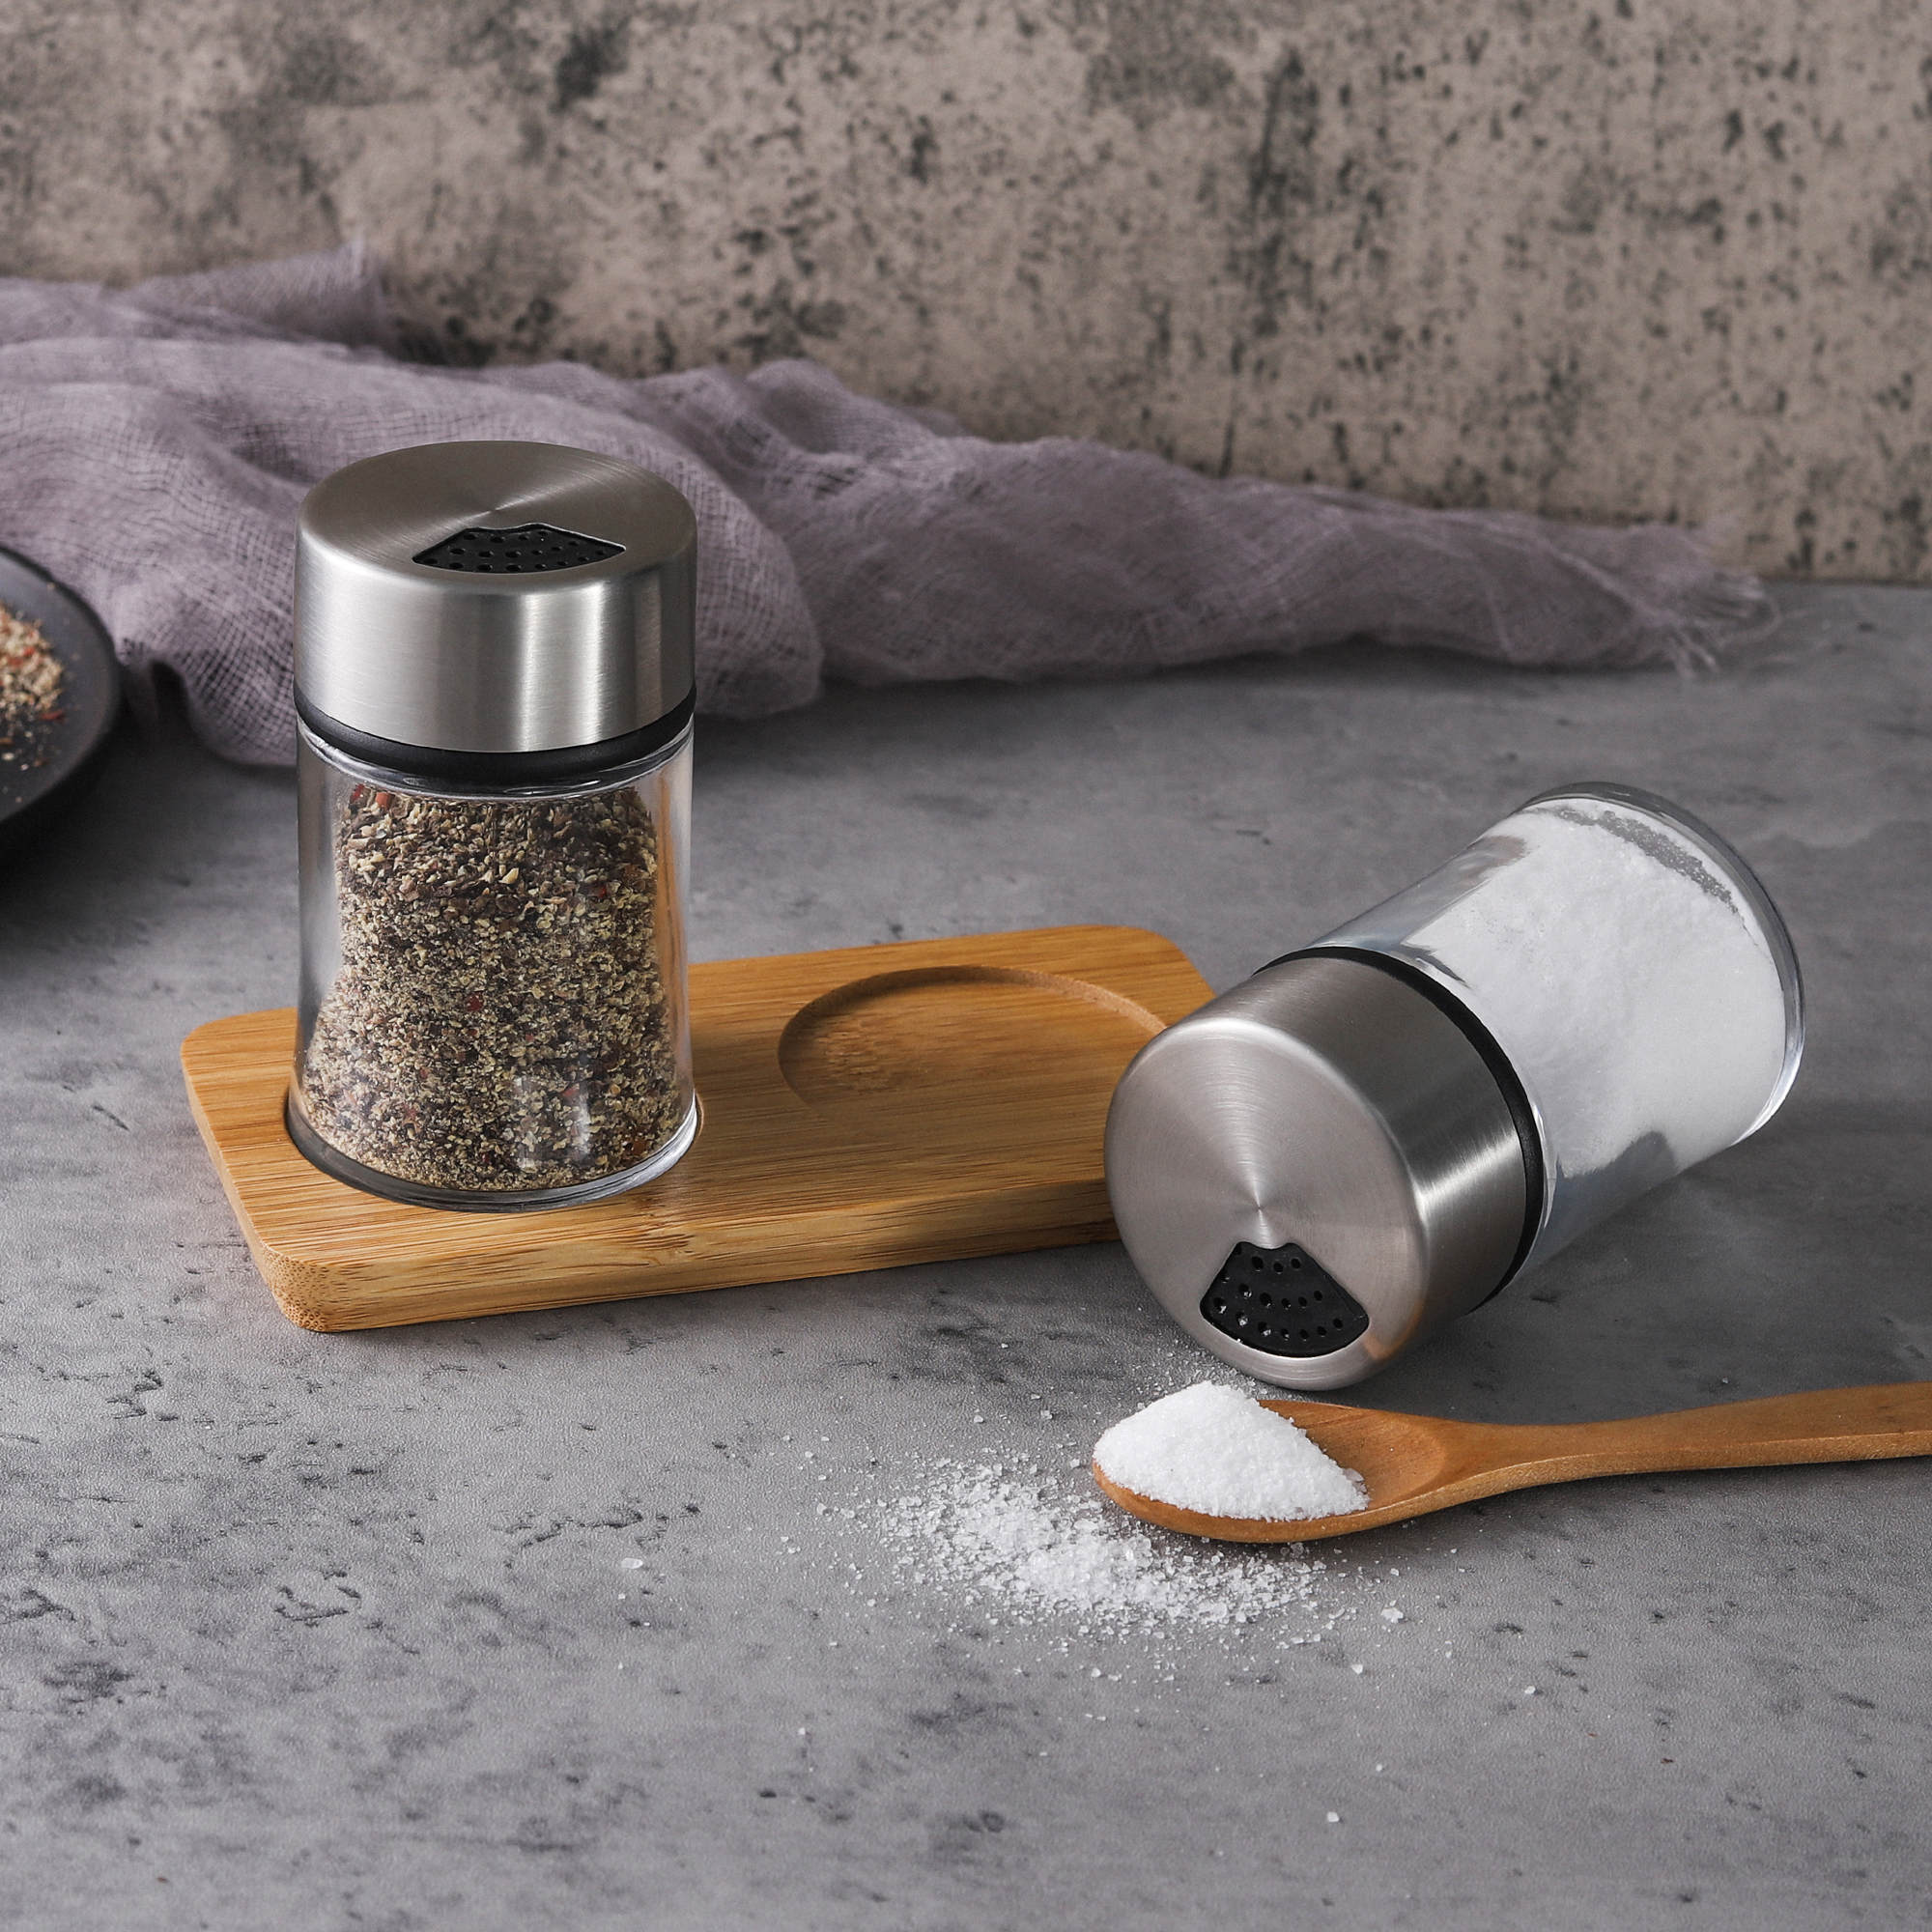 Top 10 Handheld Coffee Grinders for 2021: The Ultimate Buying Guide